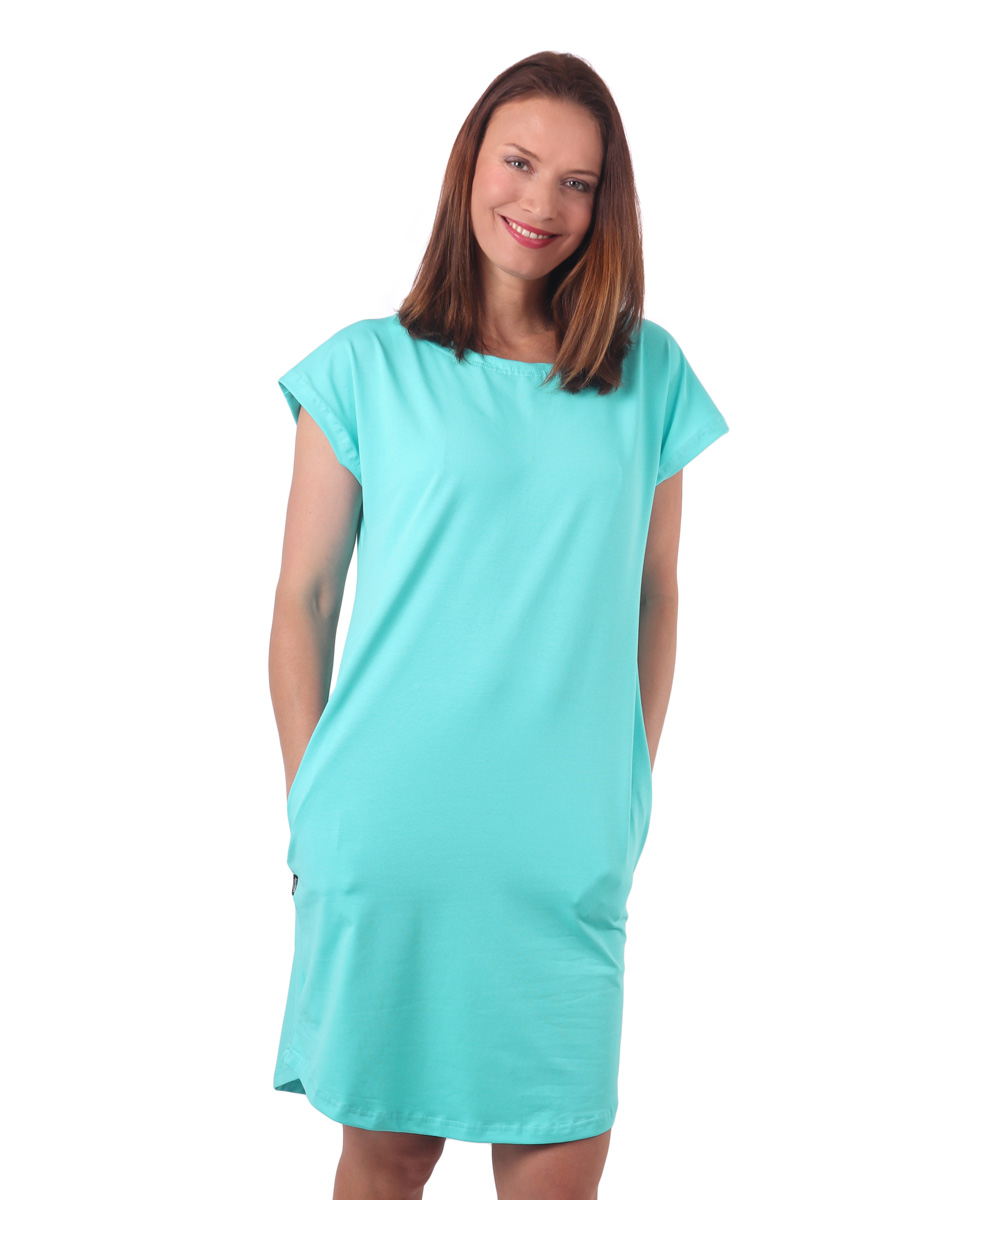 Women's dress with pockets Zoe, oversized loose fit, turquoise